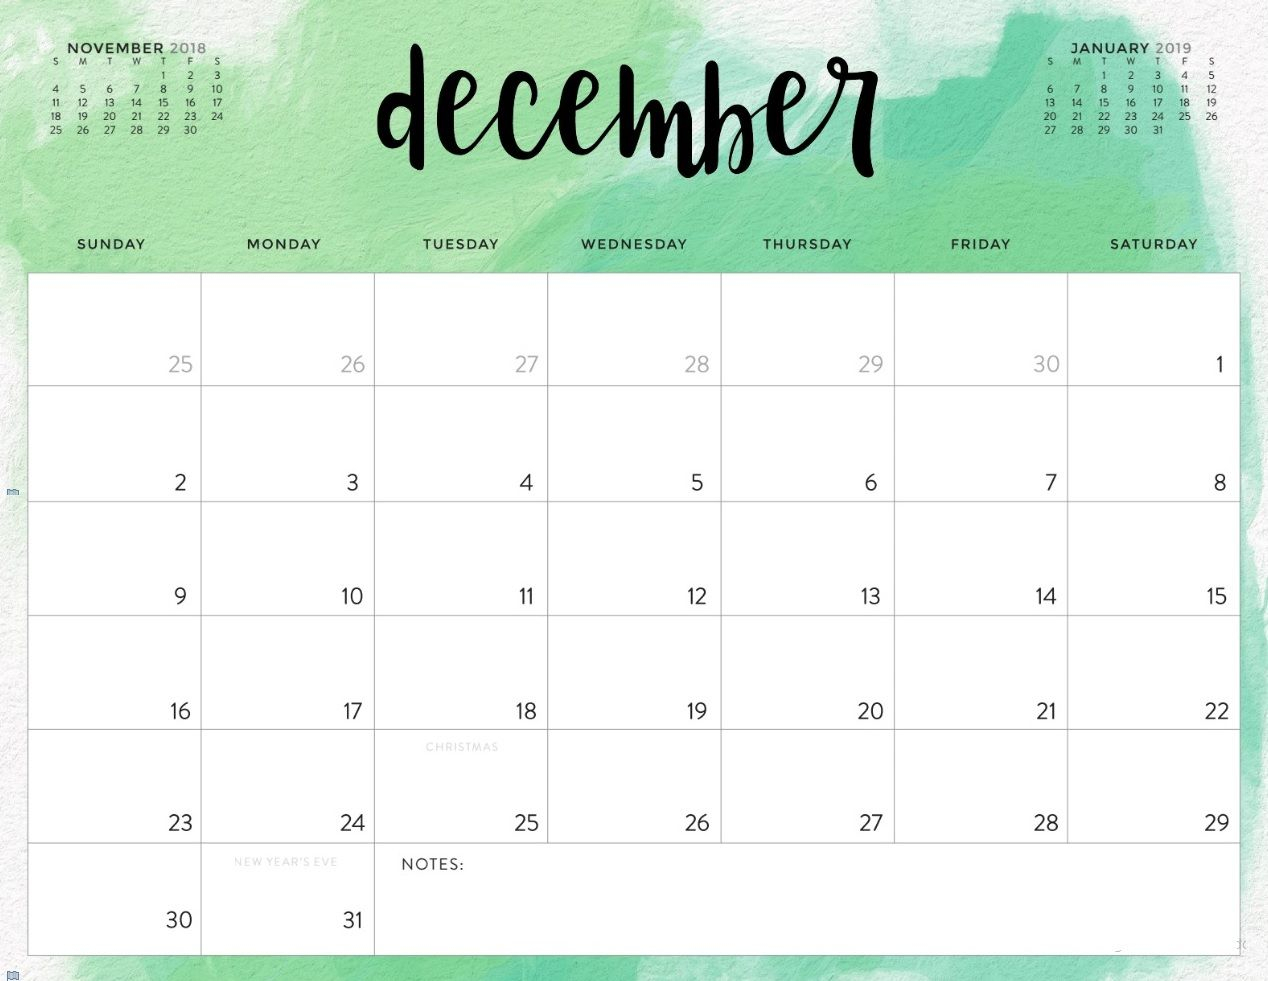 Download 2019 Calendar Printable With Holidays List | Free